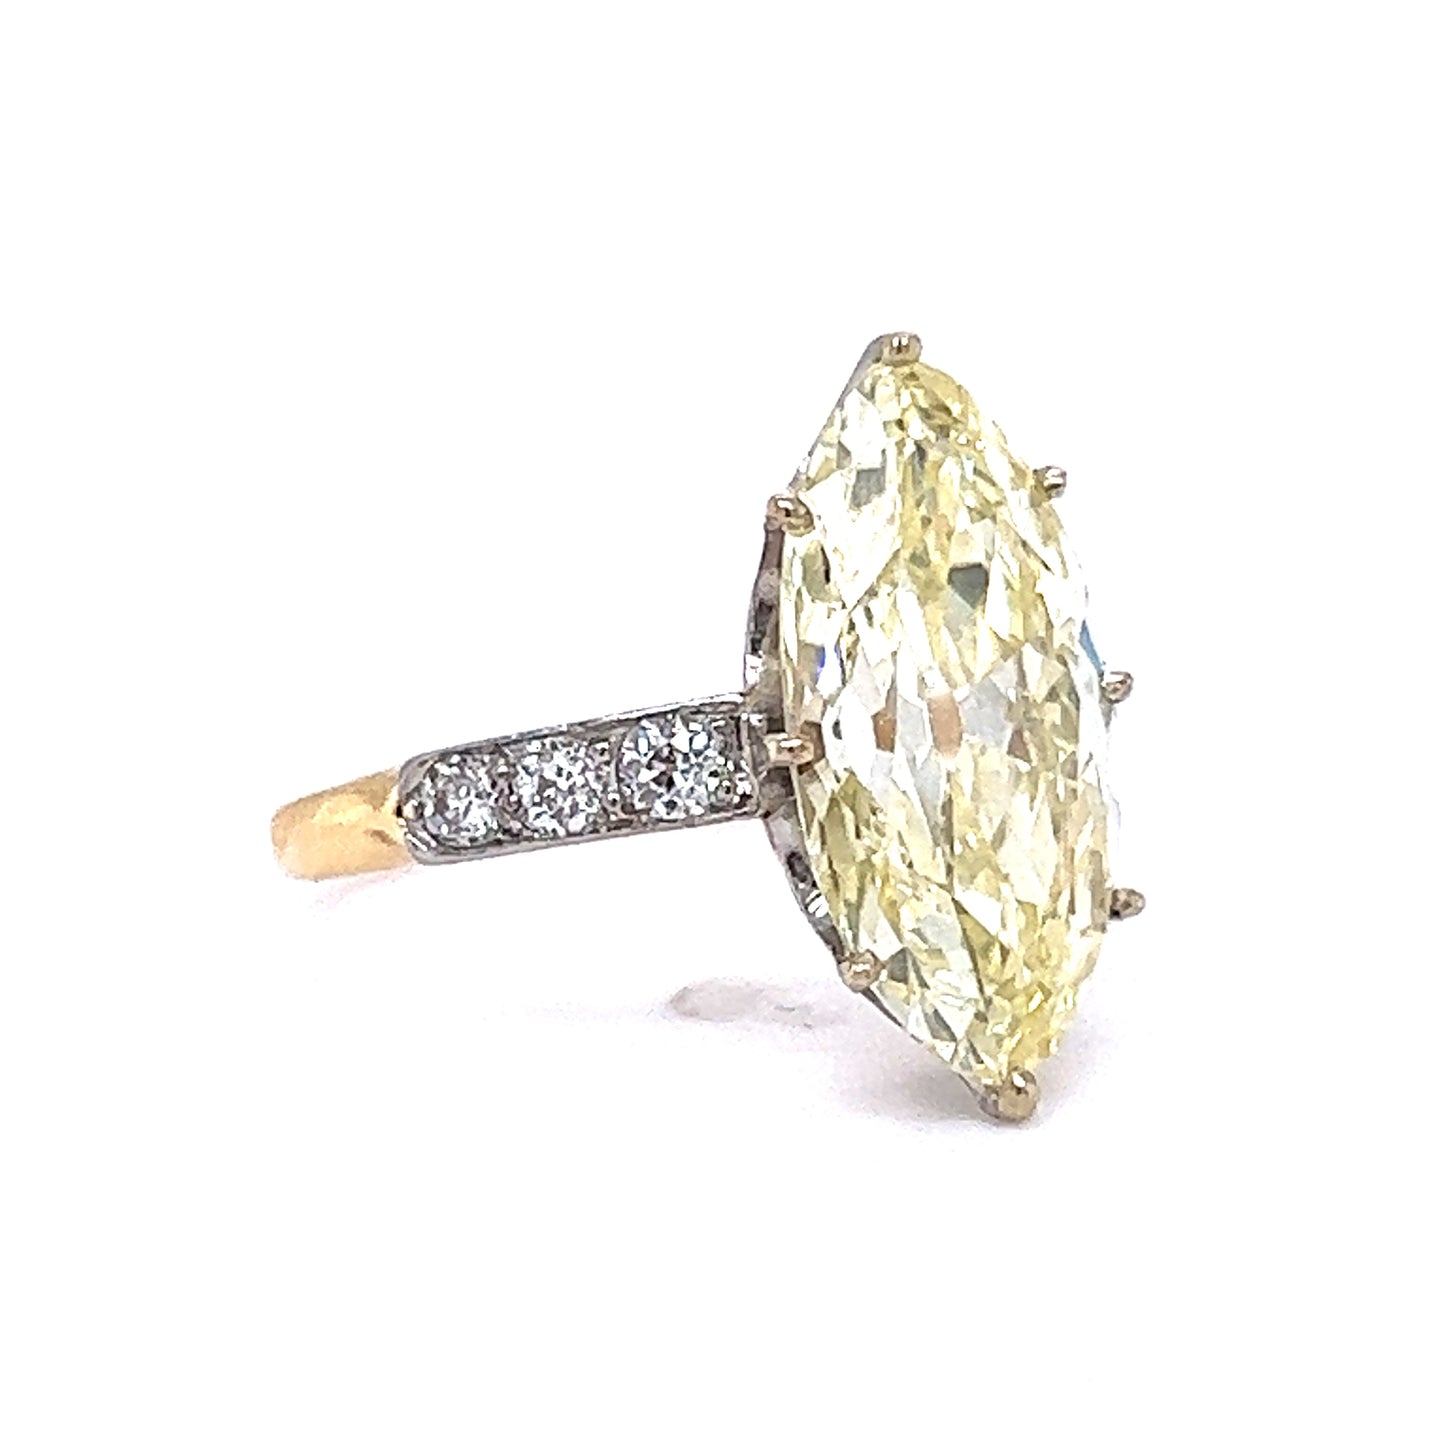 4.39 Marquise Fancy Yellow Diamond Engagement Ring in Platinum & 18k Yellow Gold